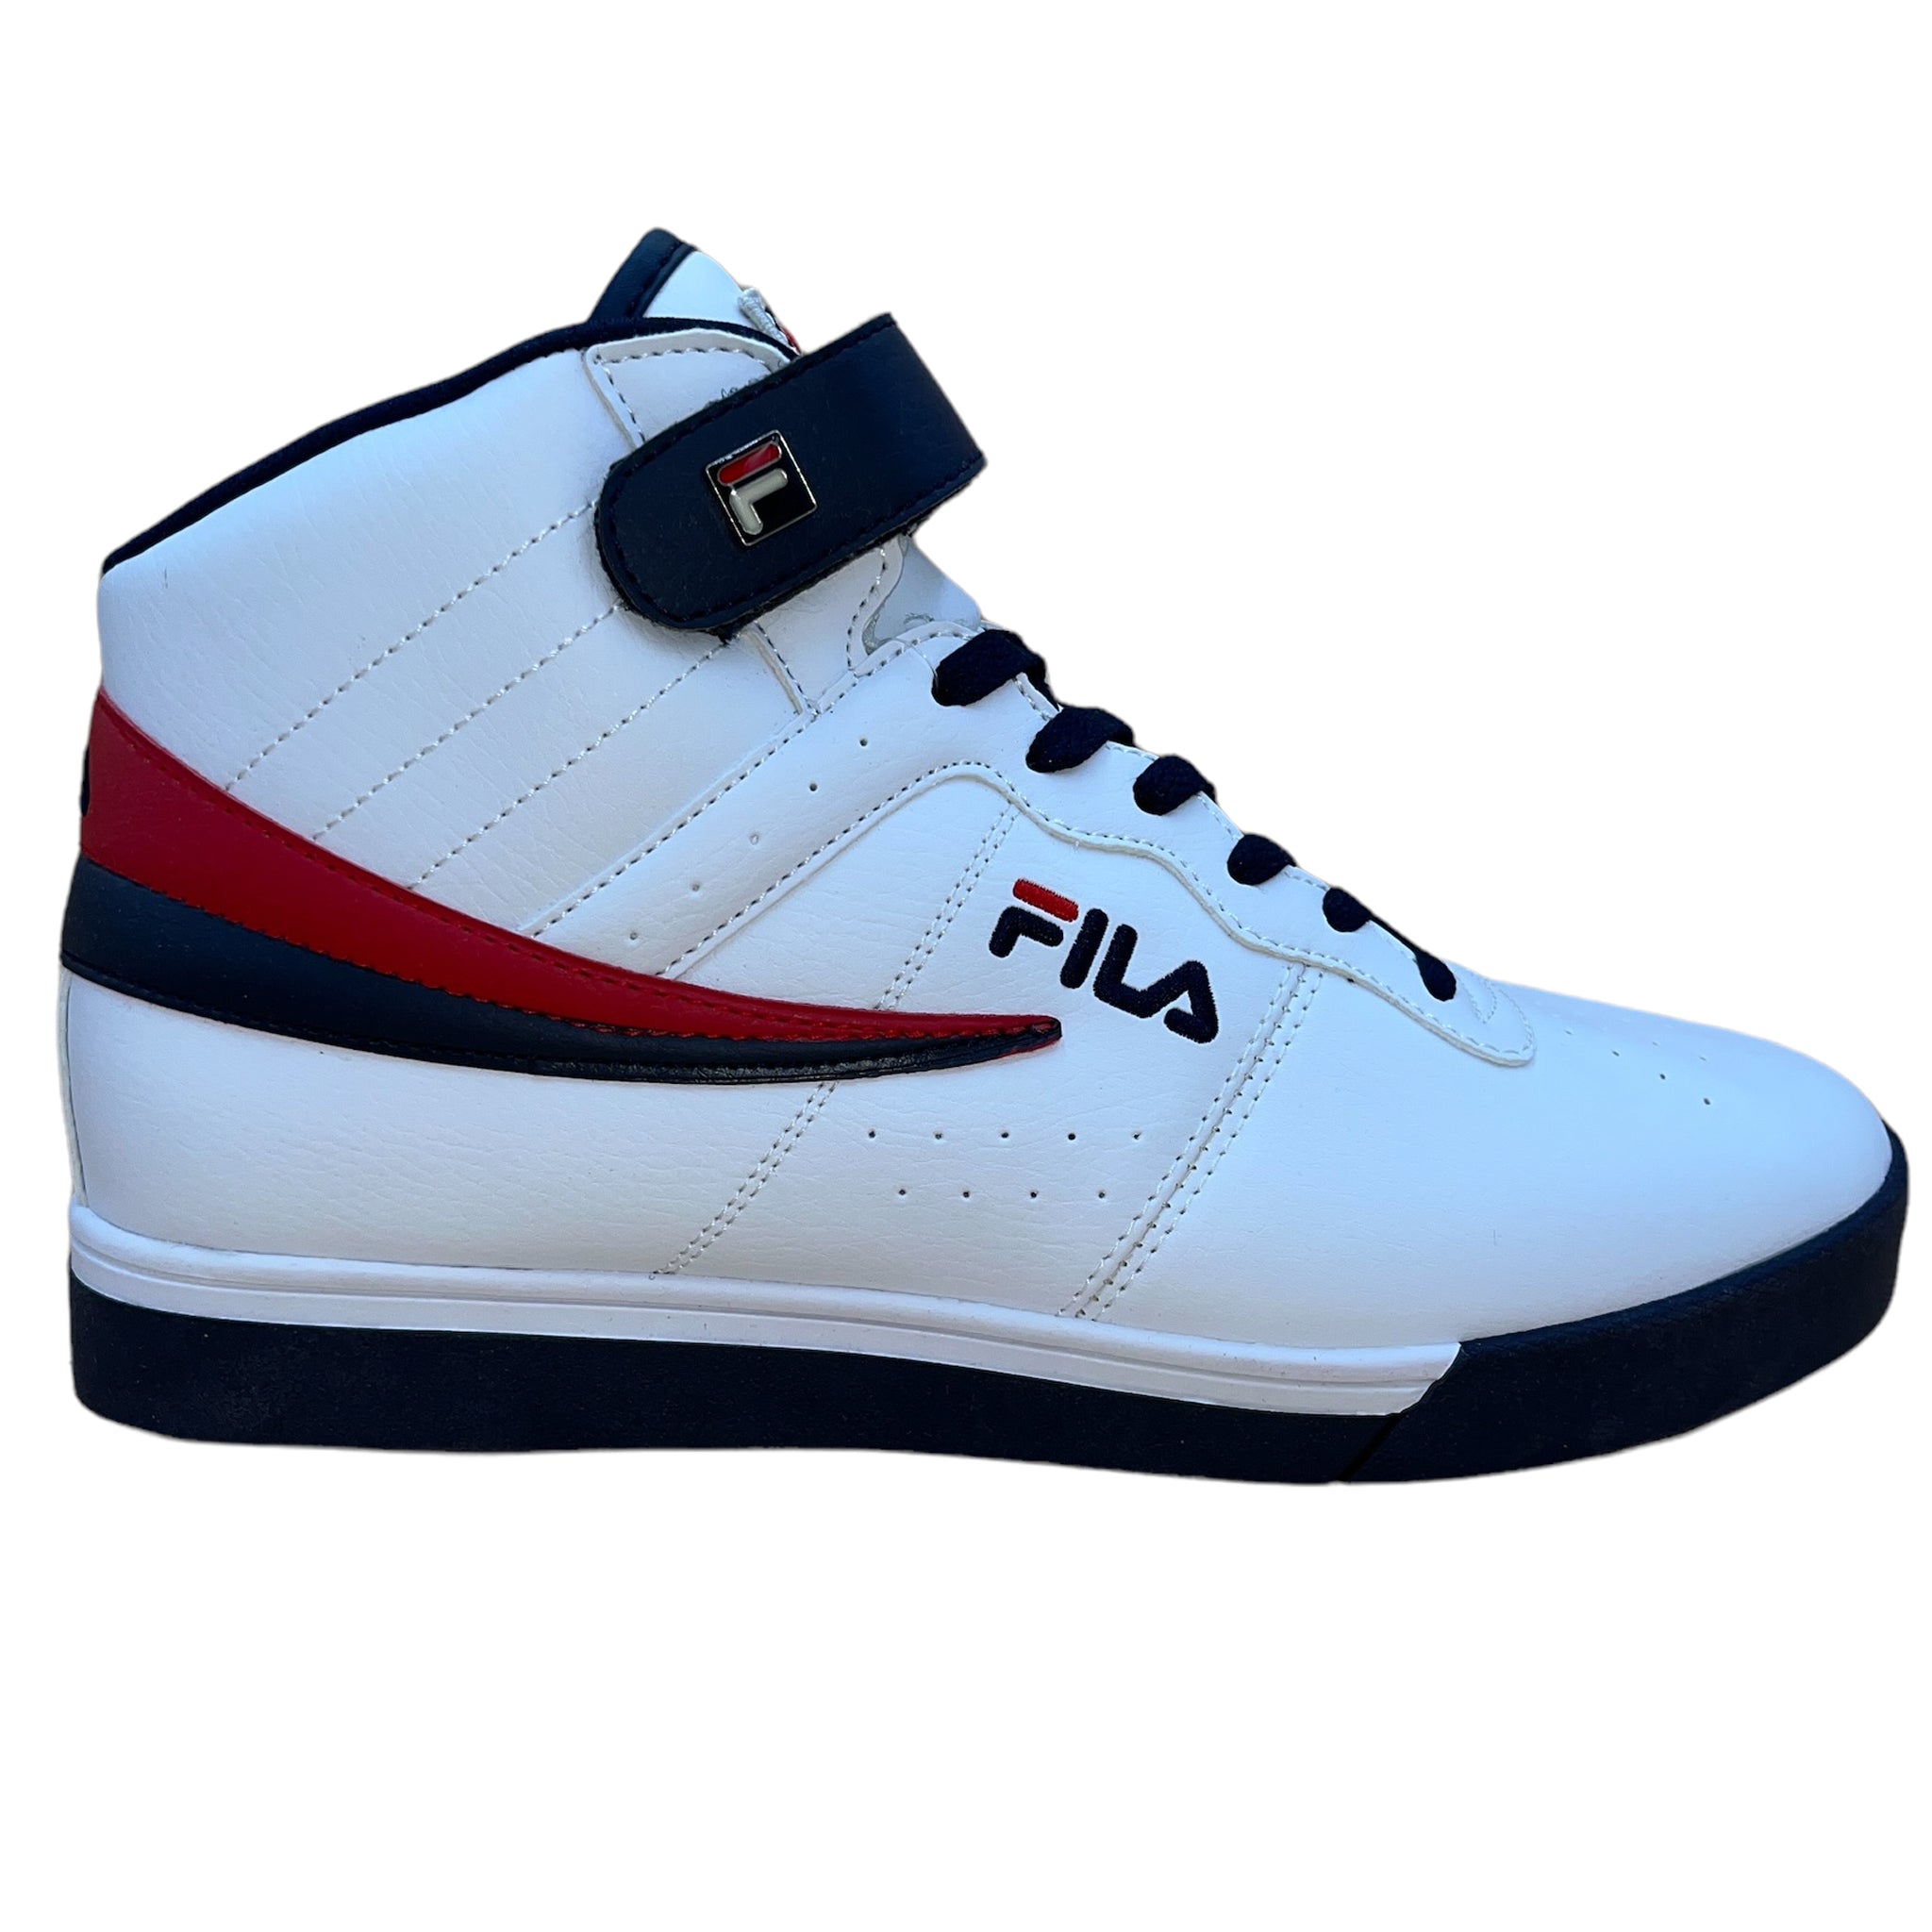 Fila Men's Vulc Mid White Navy Red Casual Shoes 1SC60526-125 – Shoe Store and